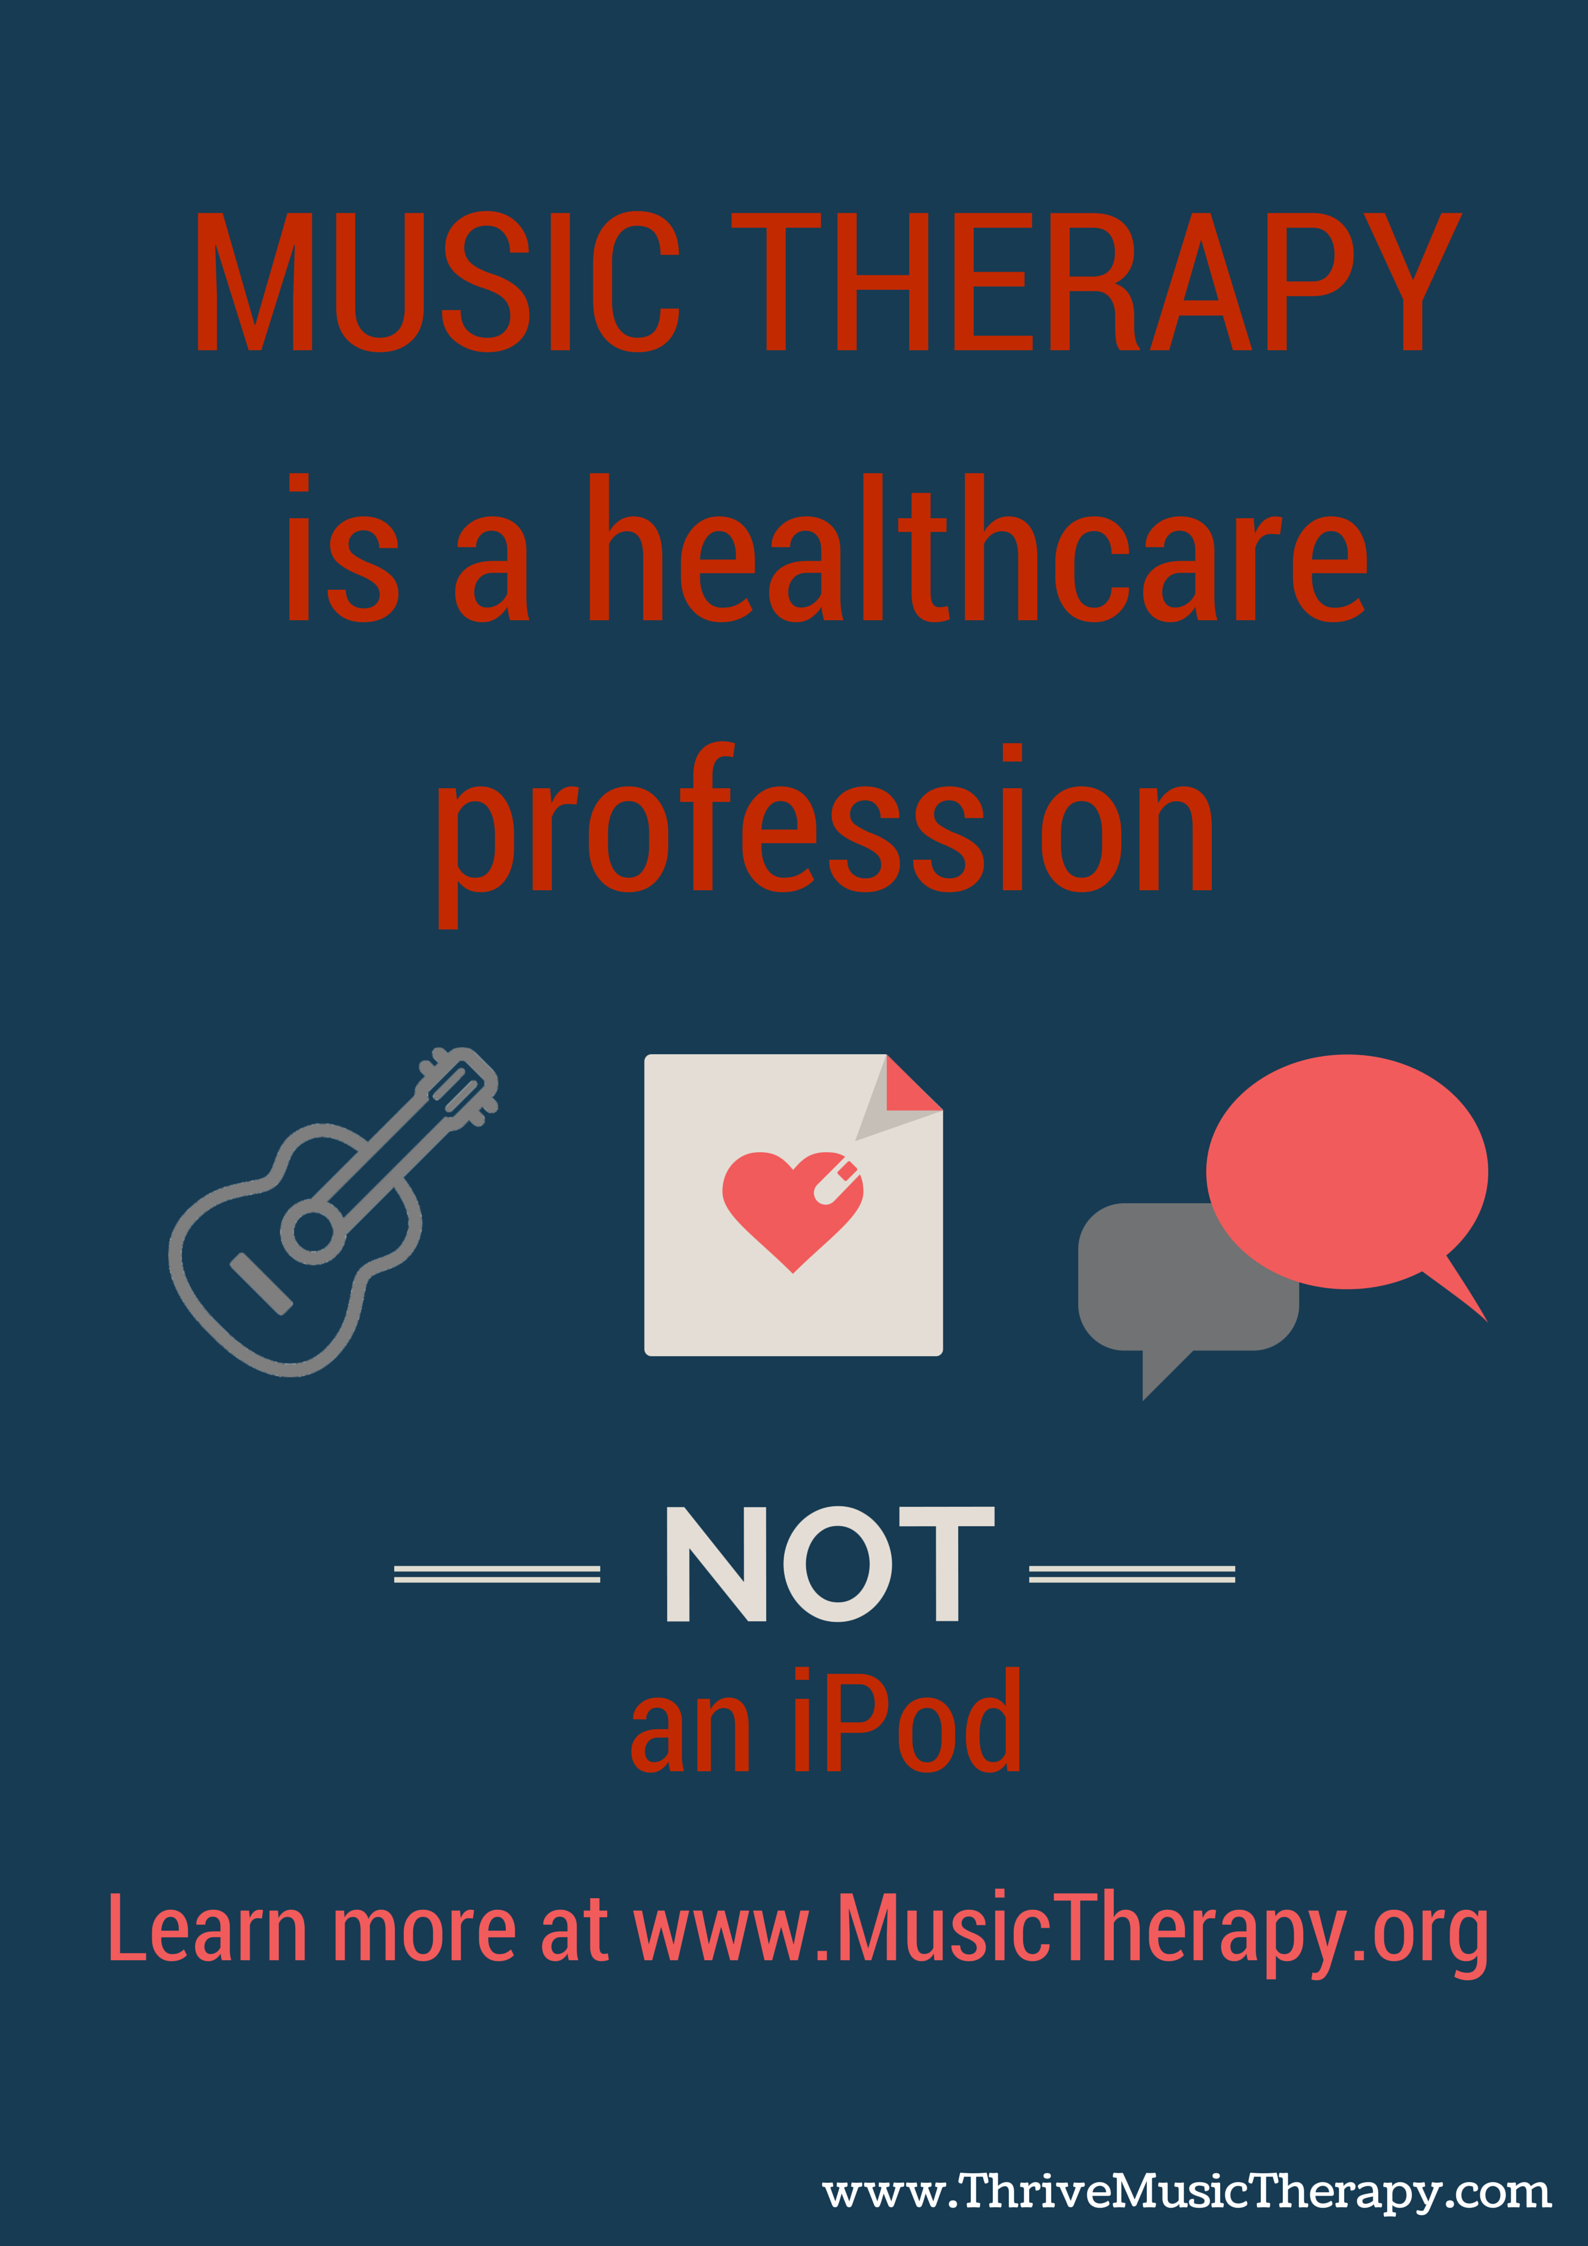 Music Therapy is NOT an iPod